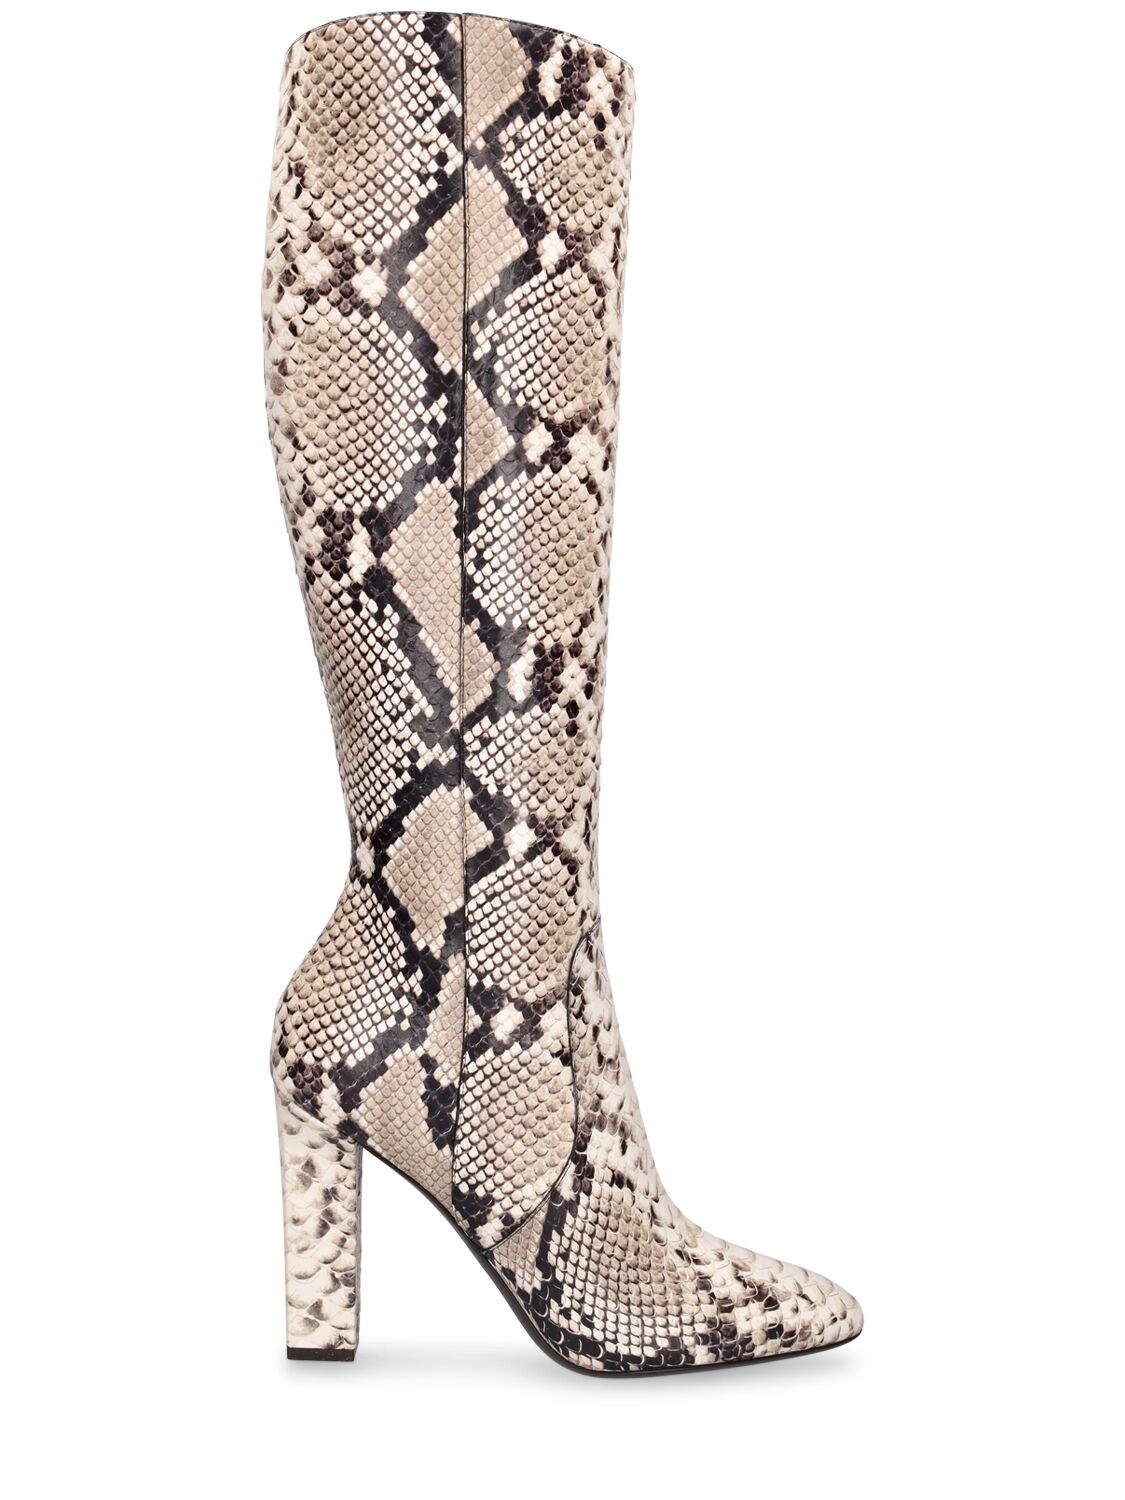 Image of 110mm Carly Runway Python Print Boots